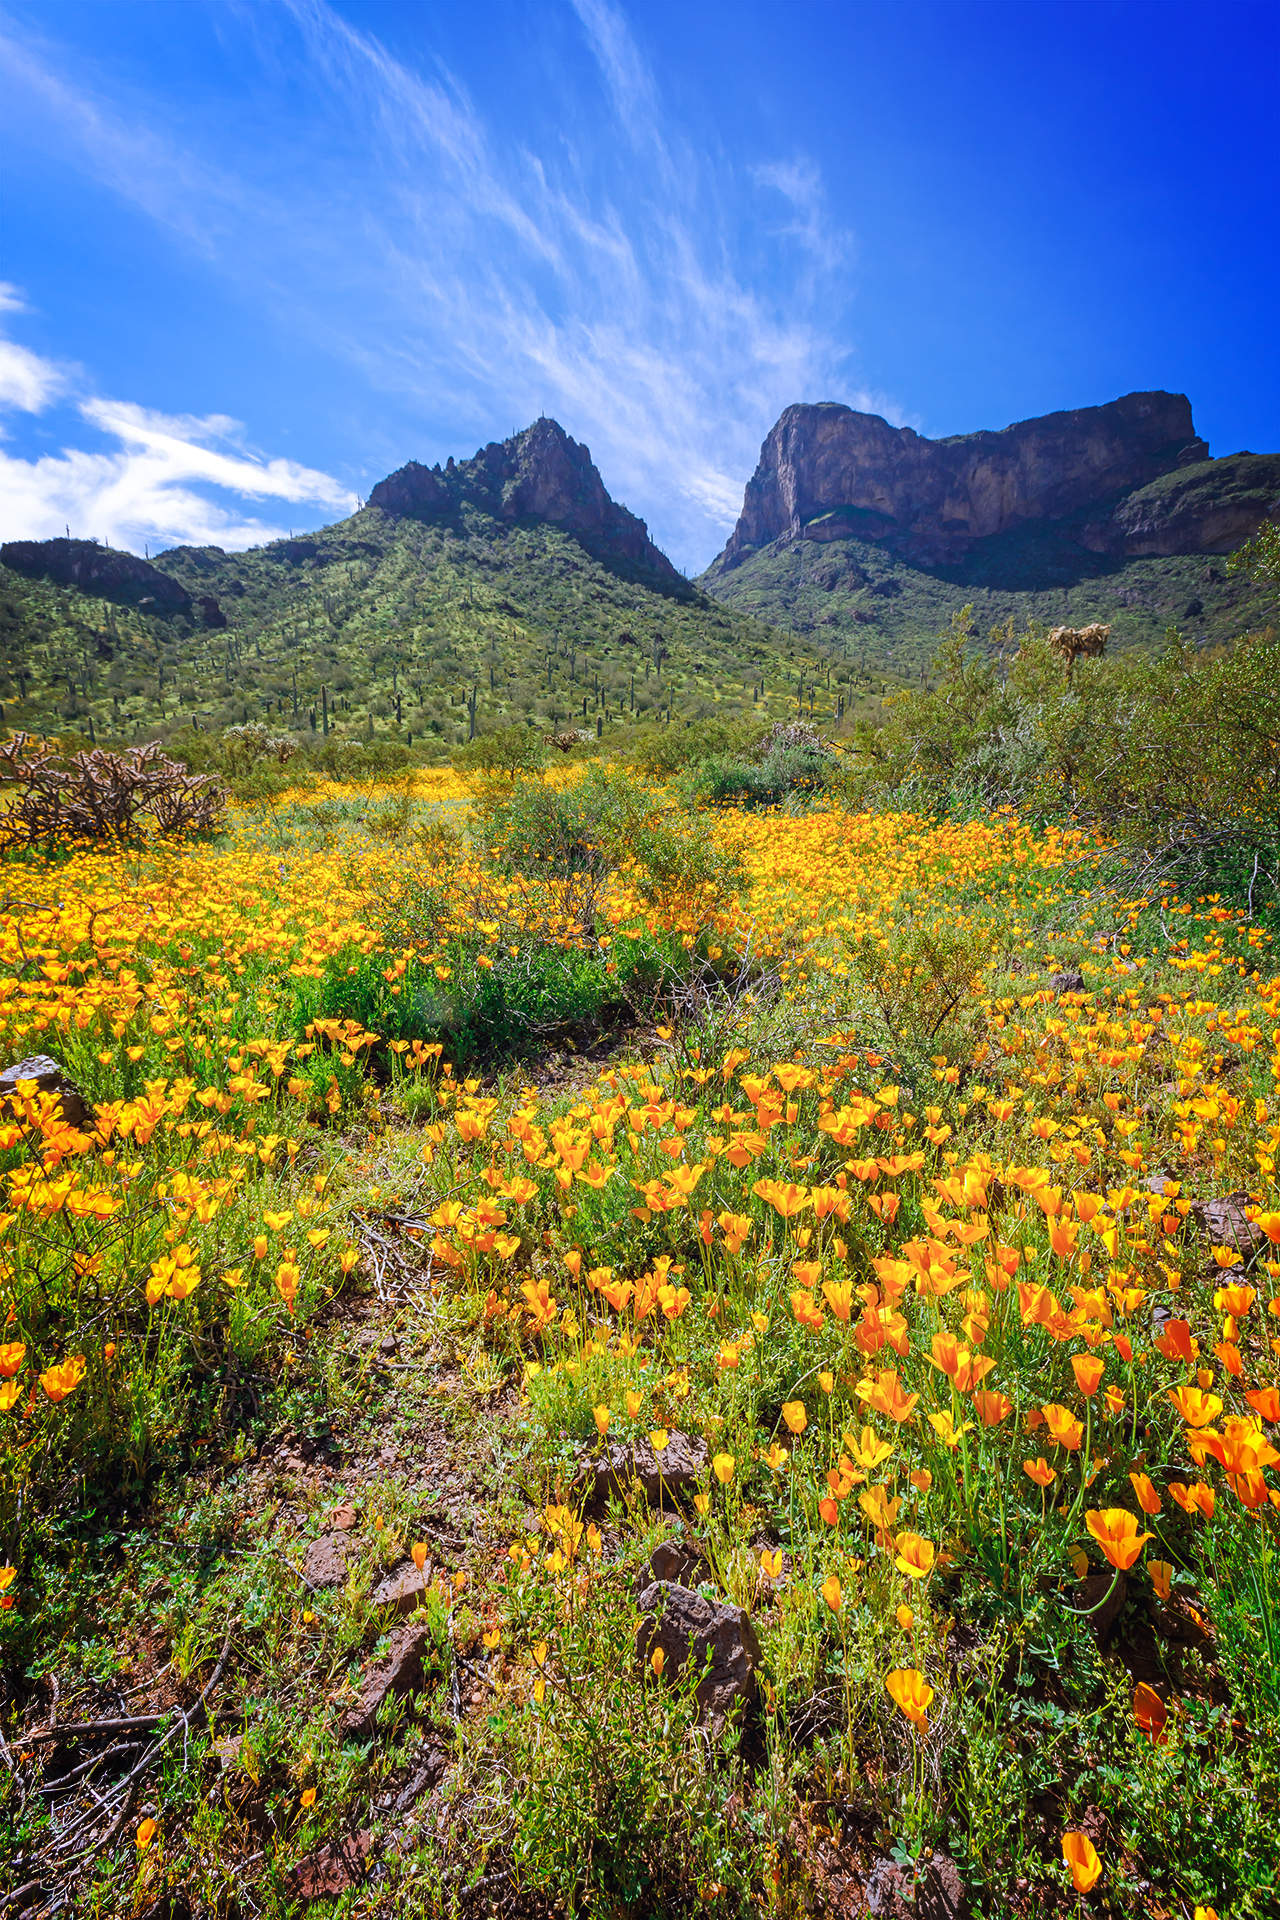 Poppies and lupine in a field with Picacho Peak in the background